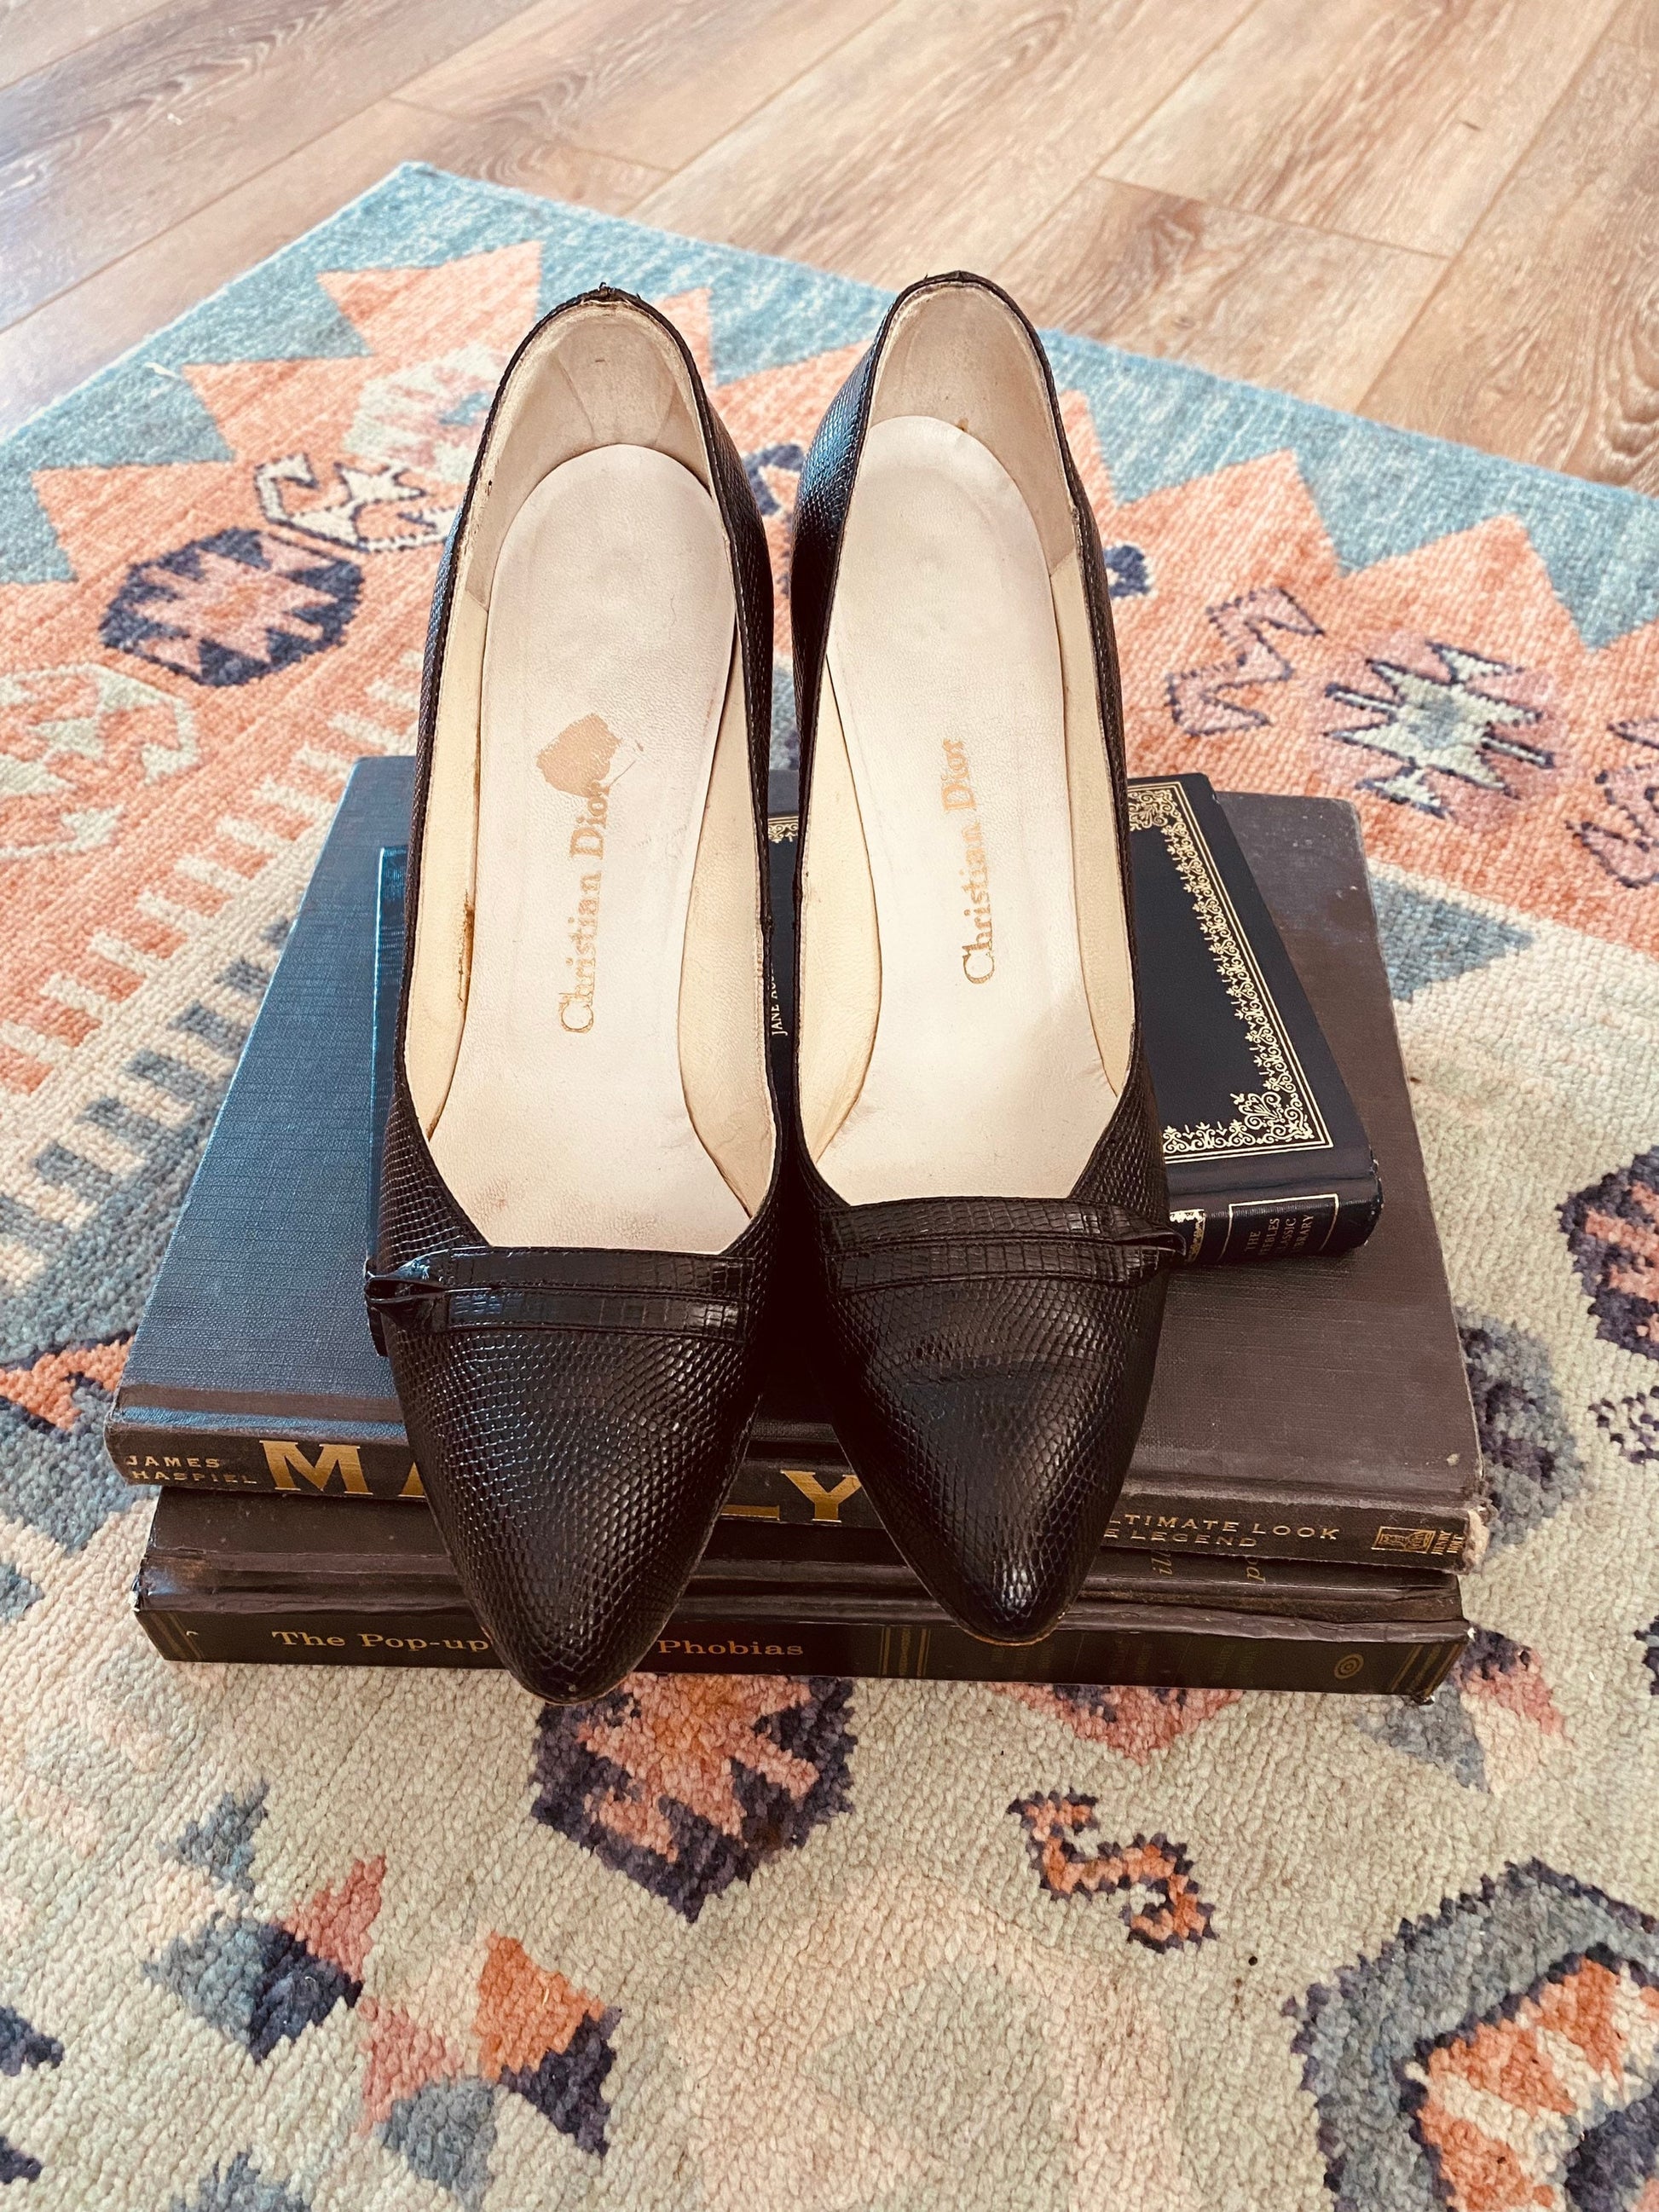 Vintage 1960s Christian Dior High Heels / 60s couture pumps size 8